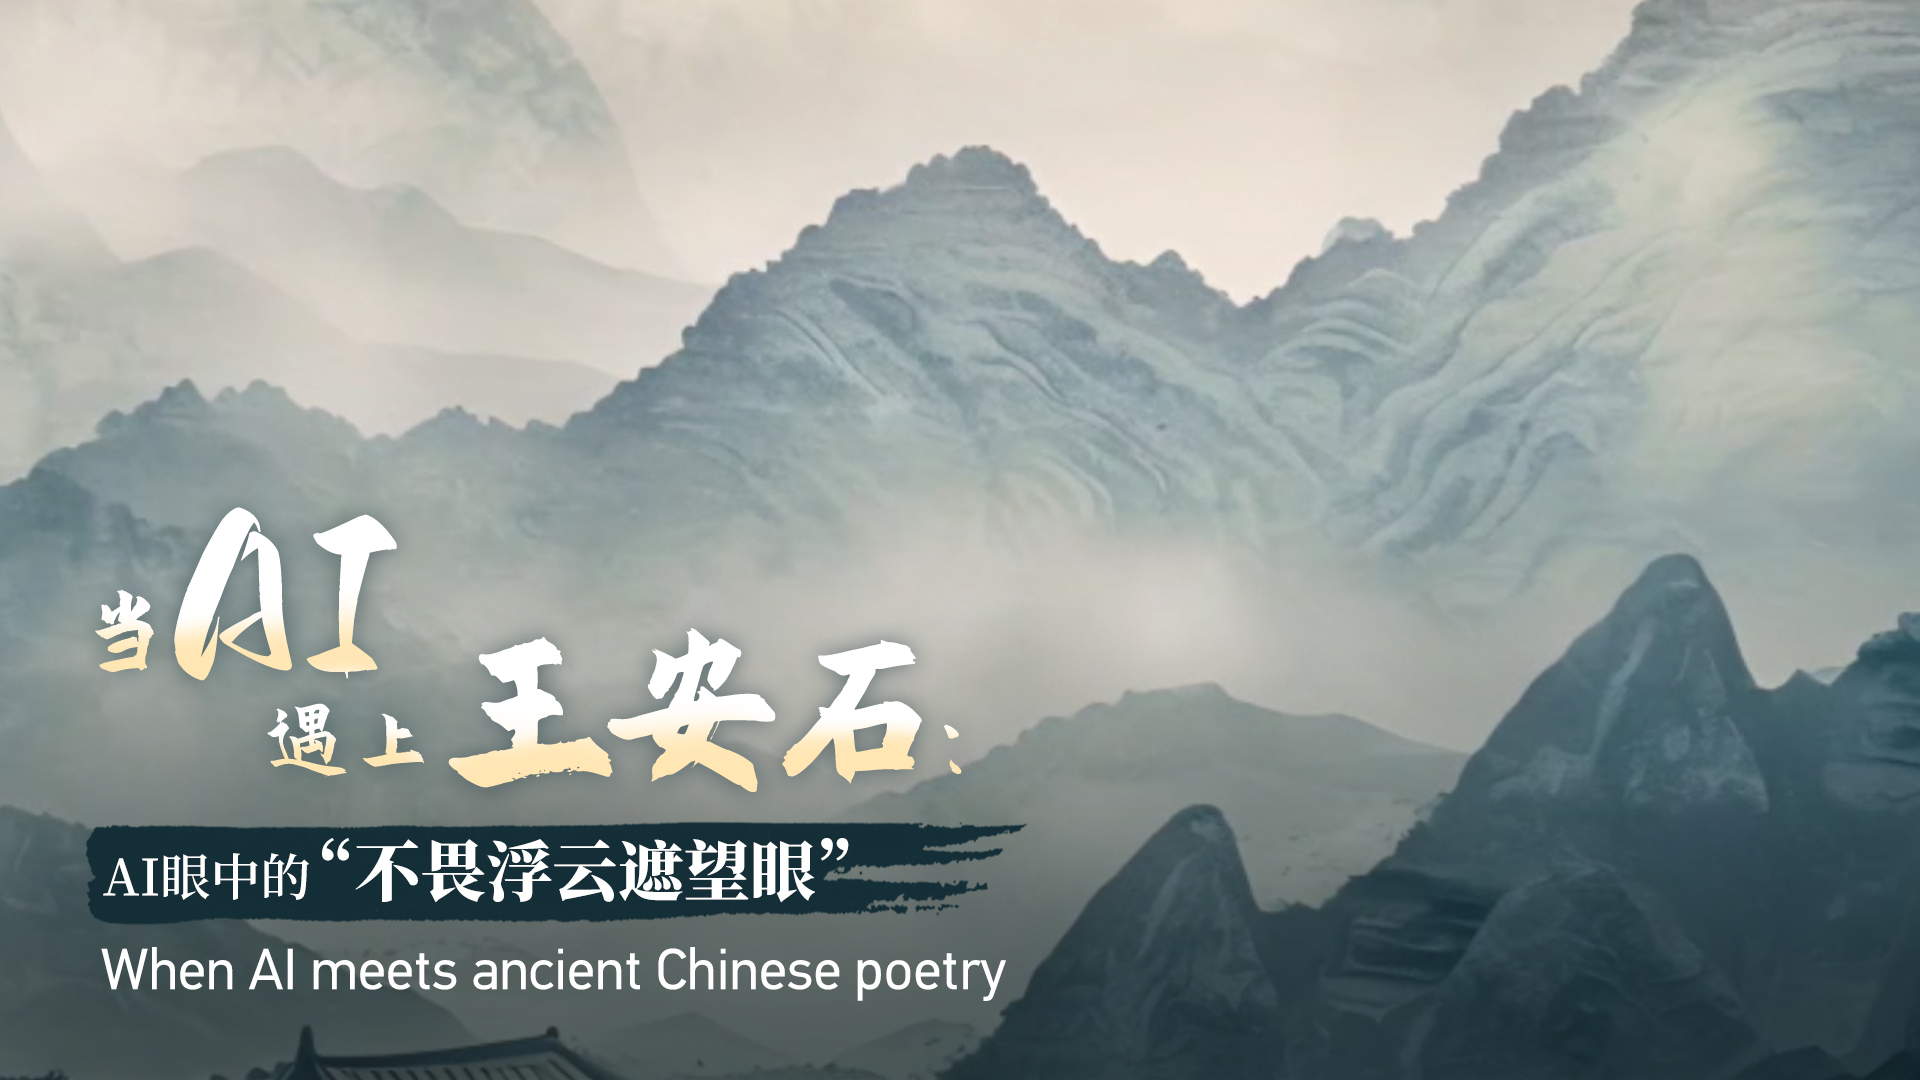 When AI meets ancient Chinese poetry: 'Ascending the Feilai Peak' by Wang Anshi